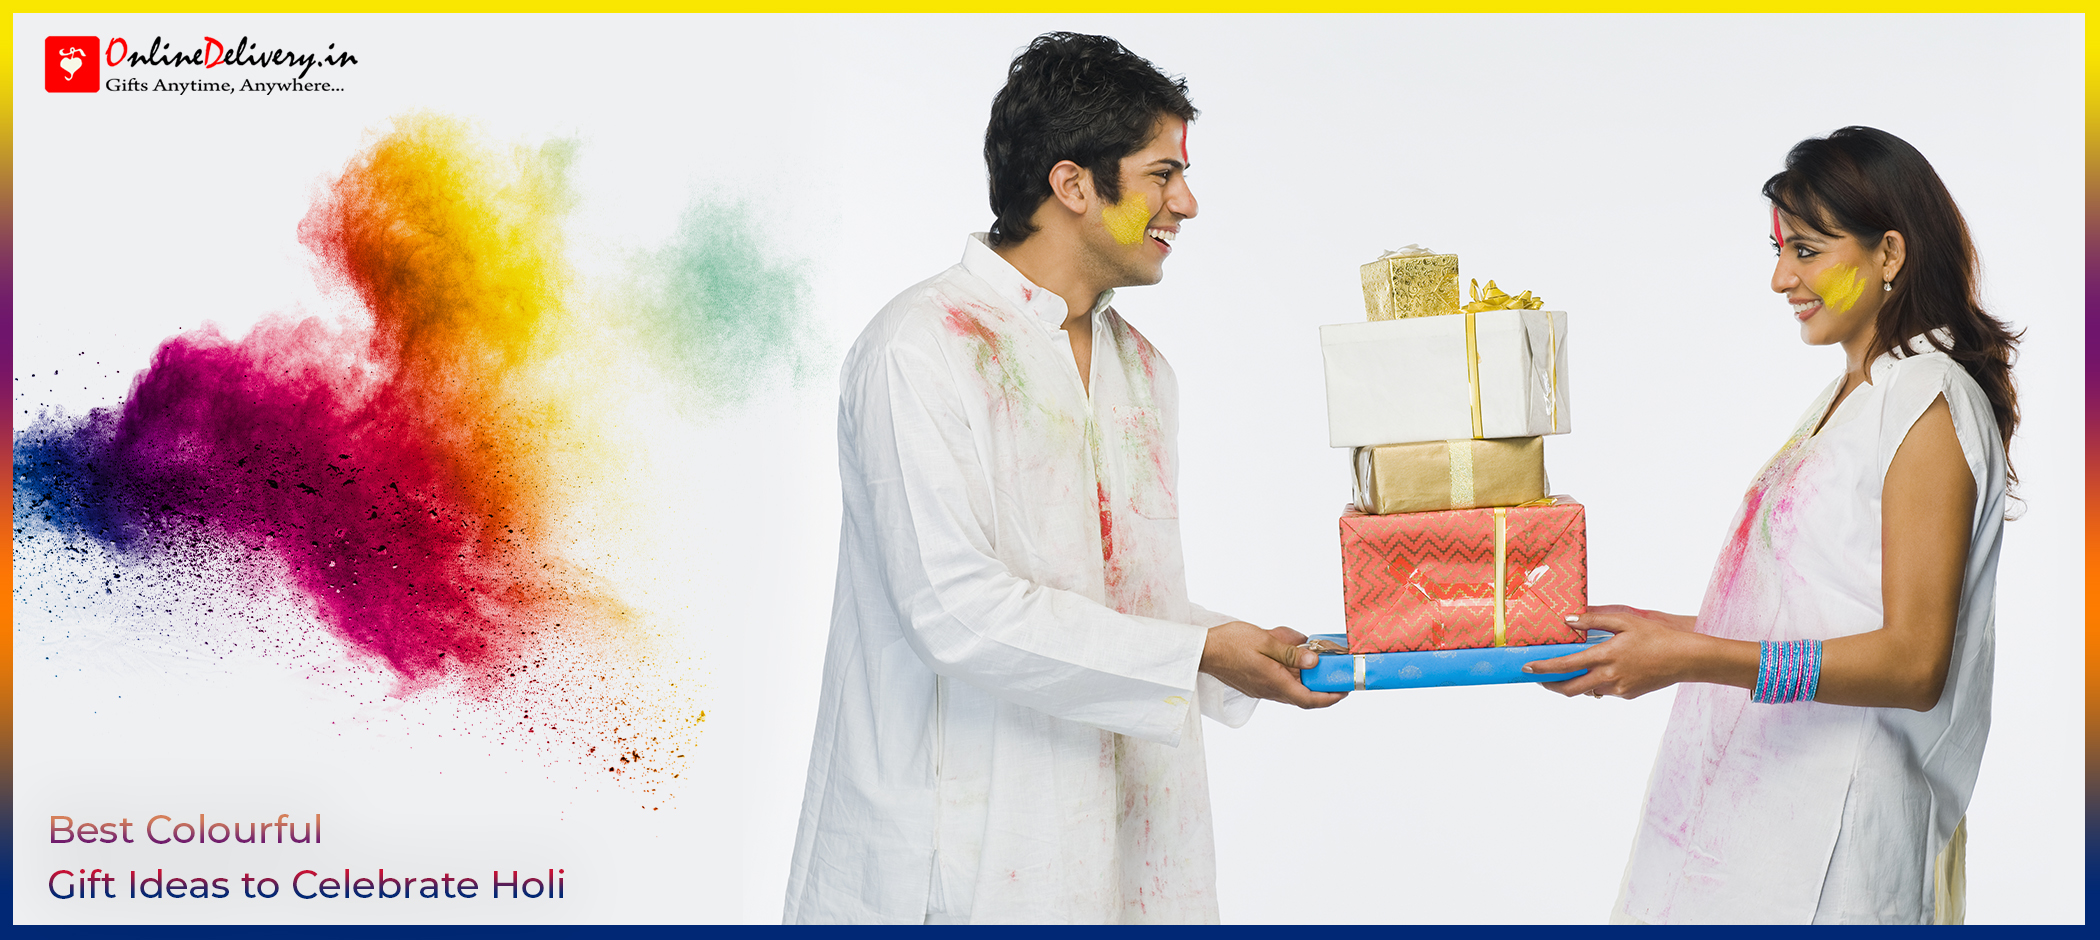 What Are the Best Colourful Gift Ideas to Celebrate Holi